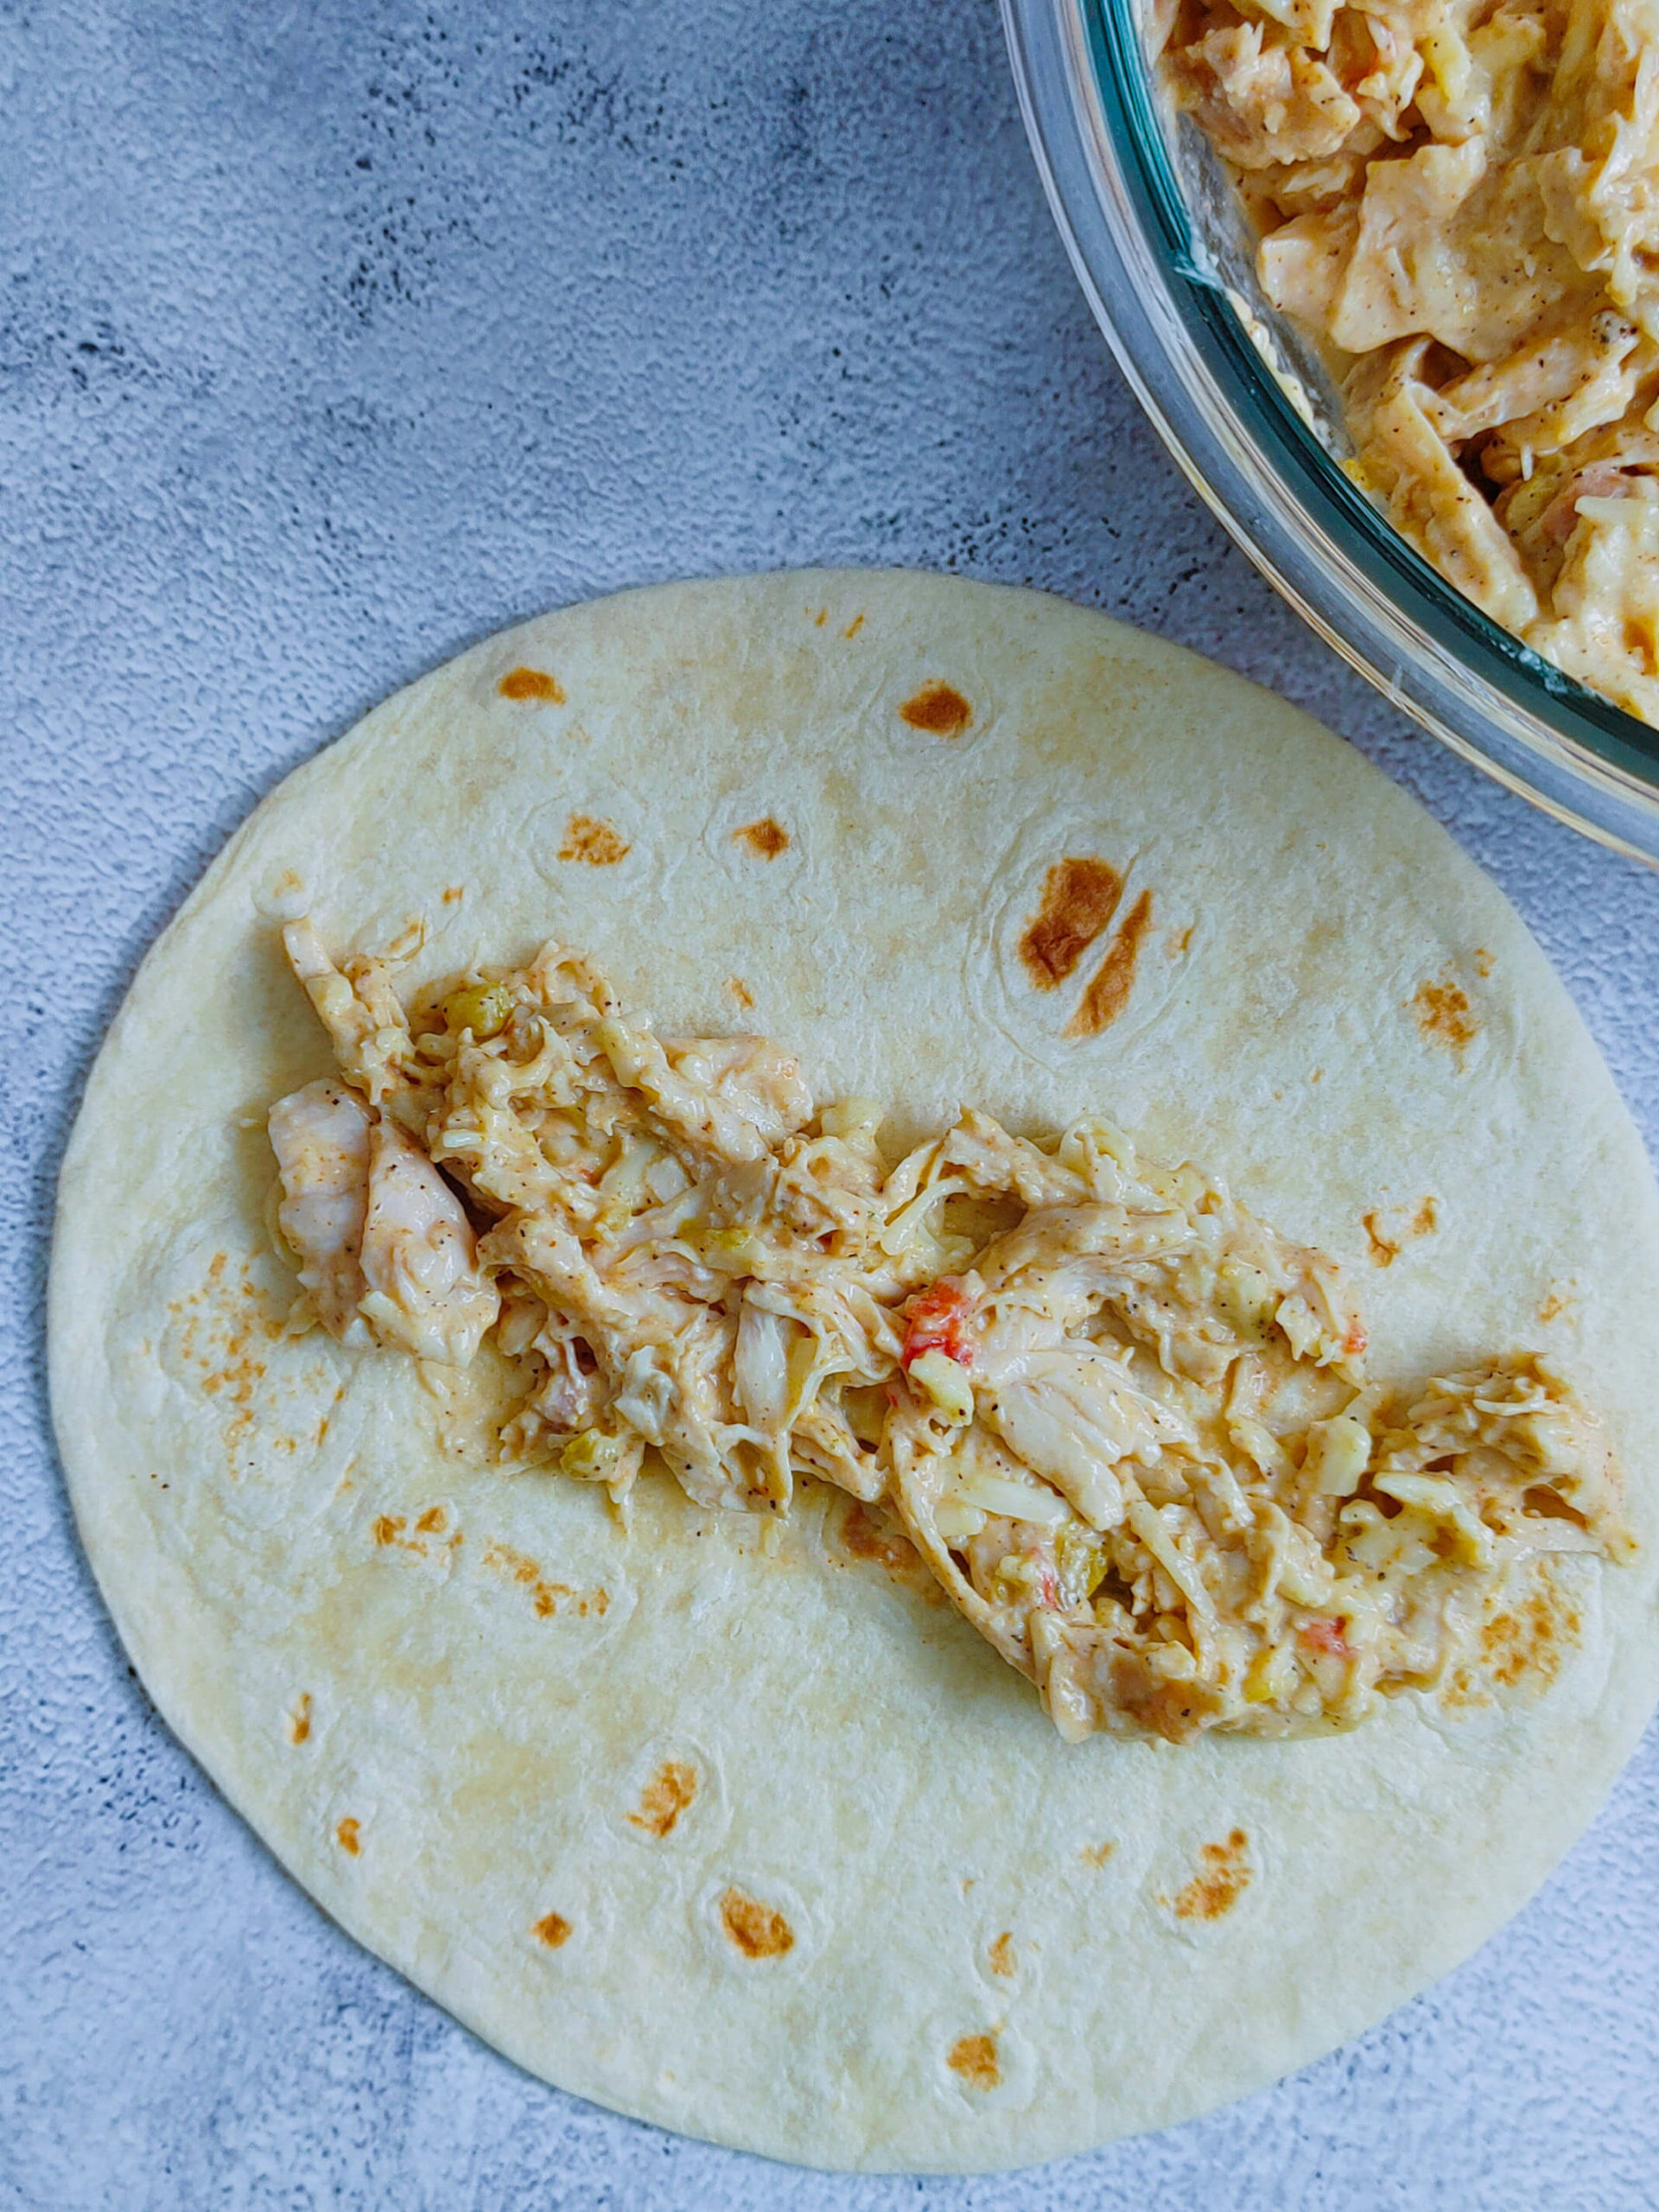 ROLL UP THE CHICKEN INSIDE THE TORTILLA